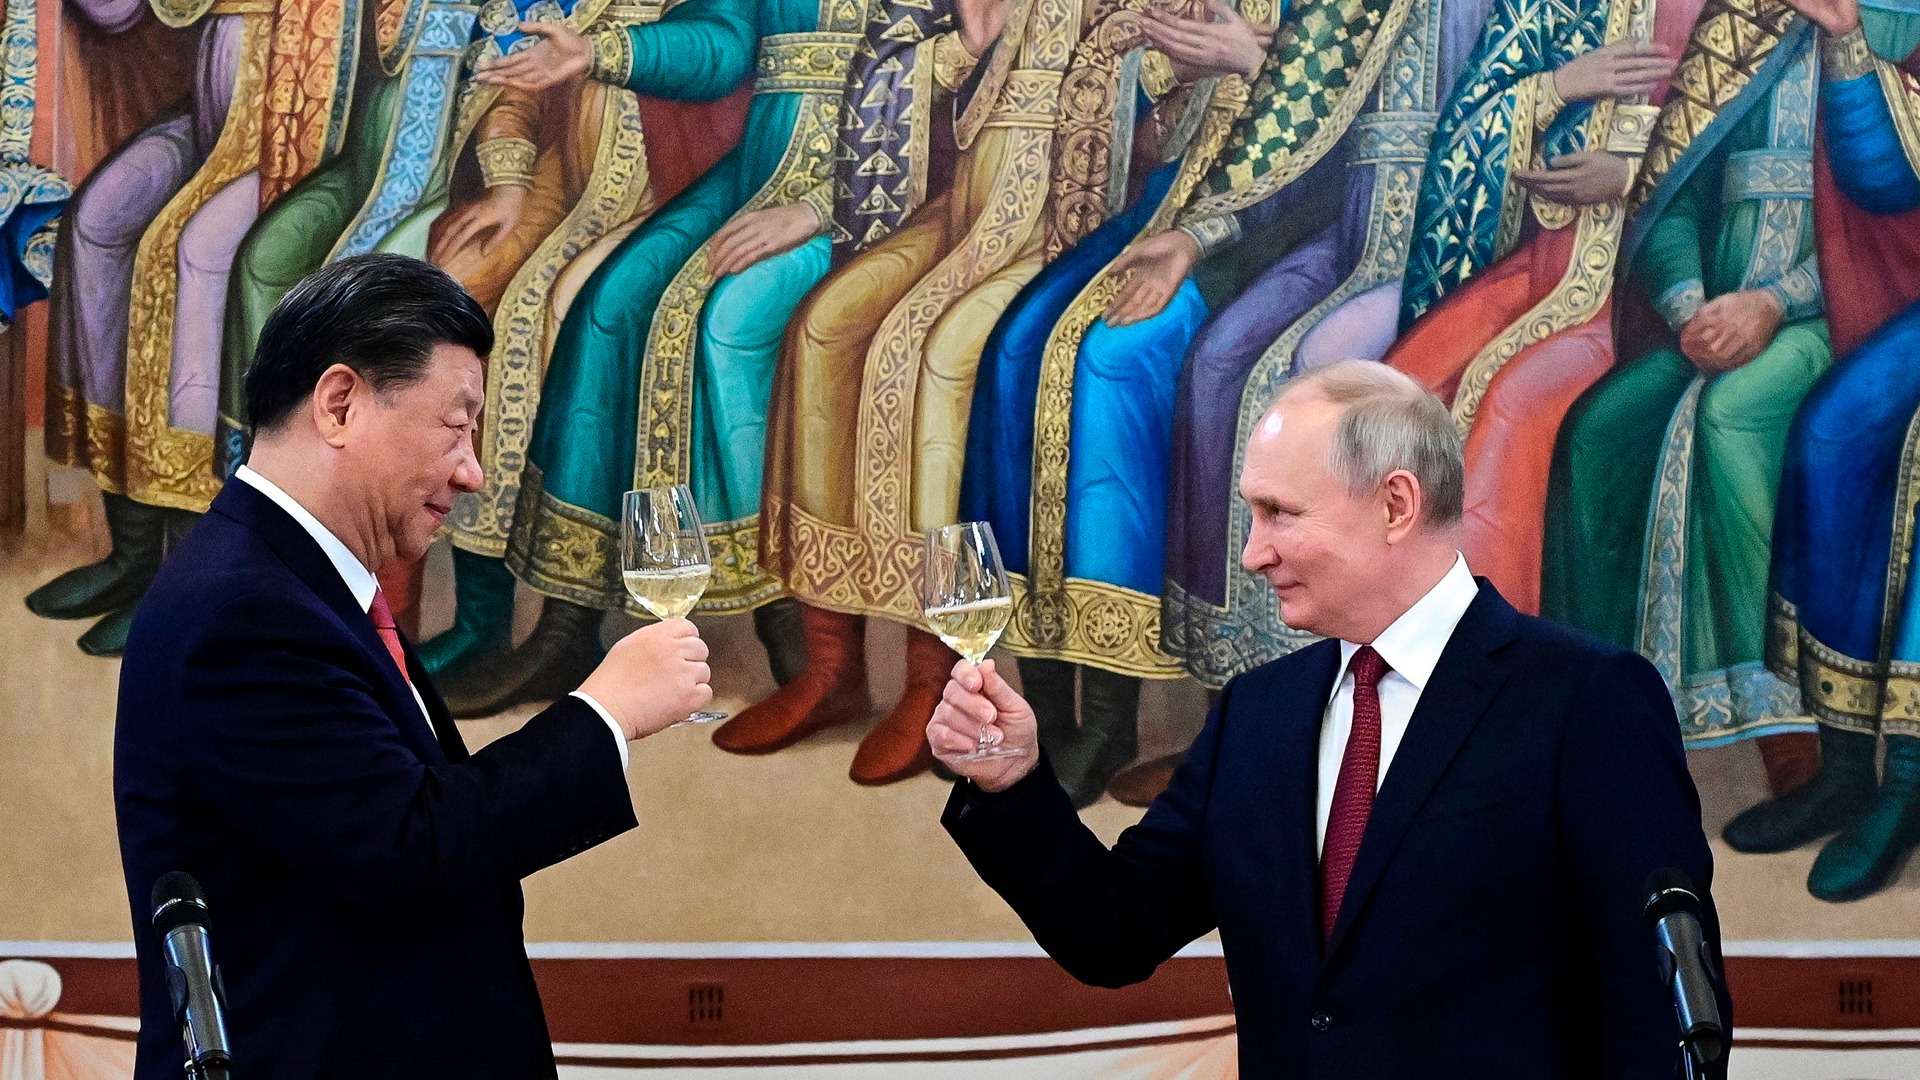 Russian Forced Rough Group Porn - Live news updates from March 21: Putin praises China's peace plan, Credit  Suisse bonuses held back | Financial Times